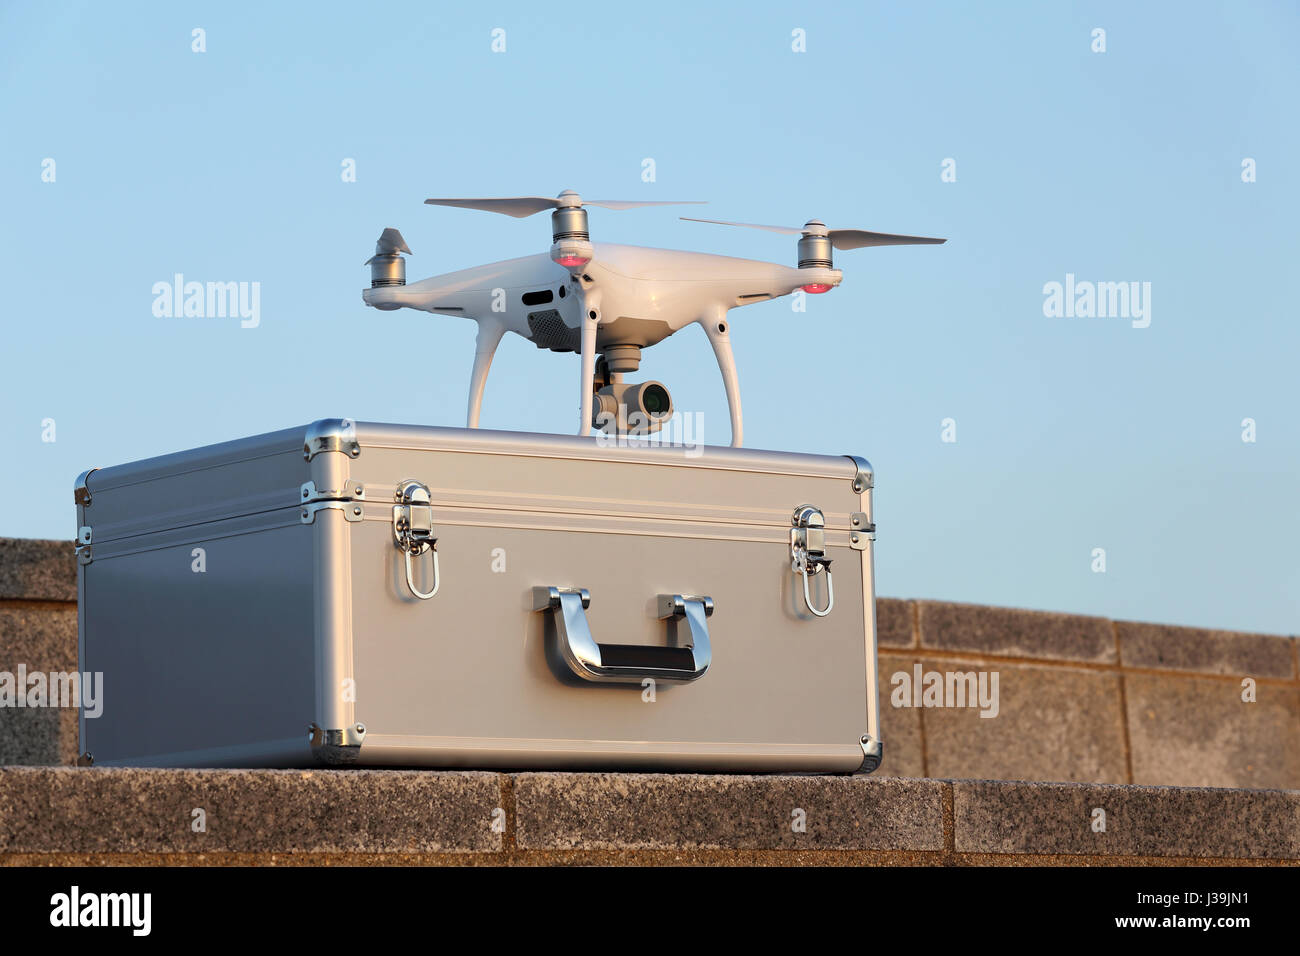 Drone before the flight on metal bag Stock Photo